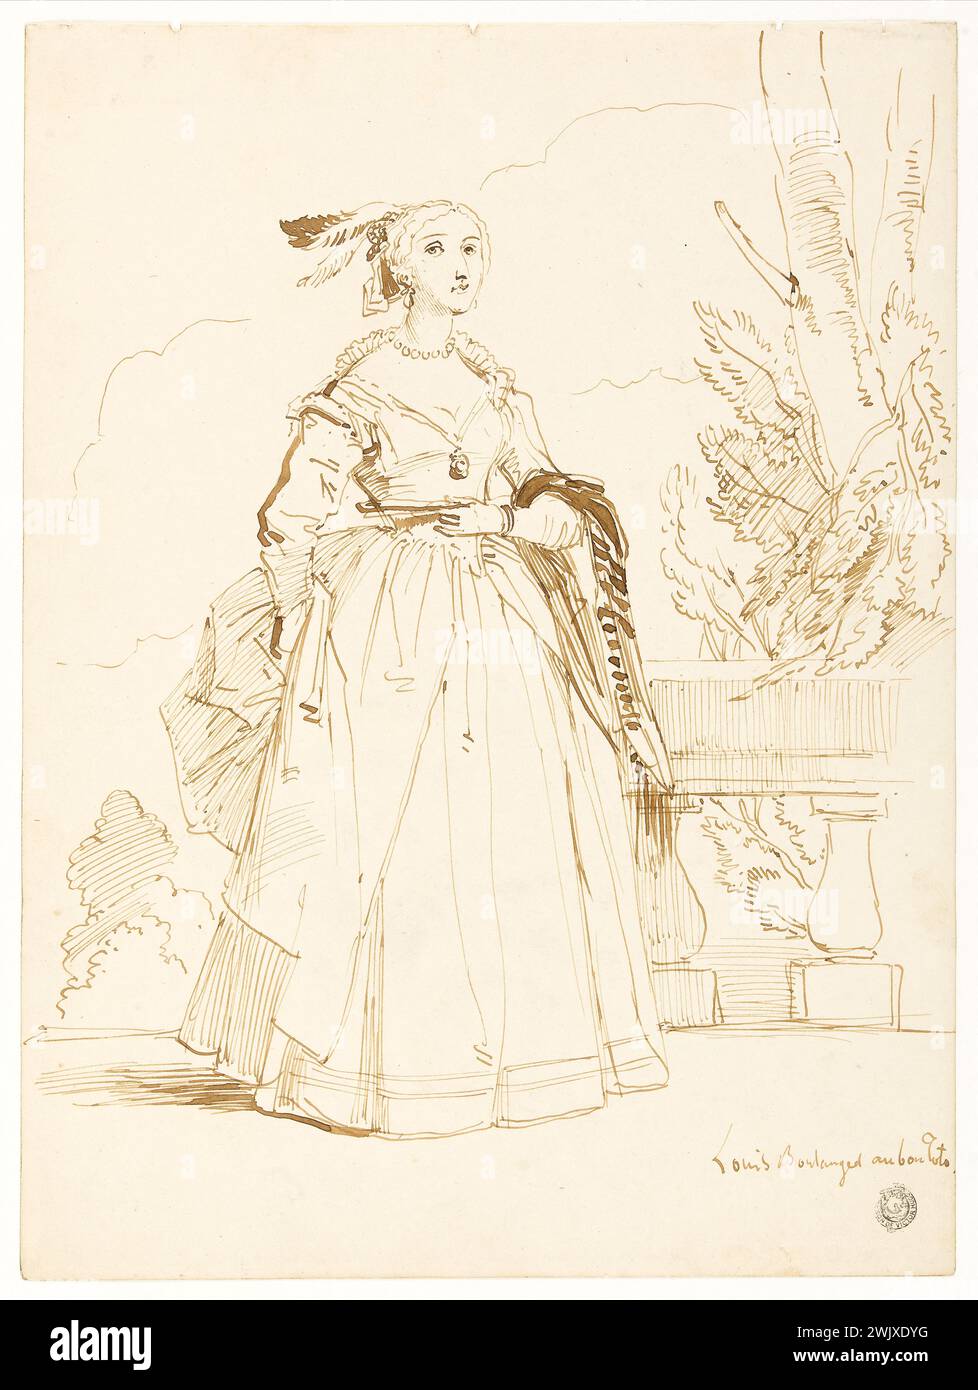 Louis Boulanger (1806-1867). 'Woman in Louis XIII costume'. Ink on paper. Paris, house of Victor Hugo. 101107-8 Costume Louis XIII, drawing, in the foot, ink, woman, portrait, 19th XIXth XIX 19th 19th 19th century Stock Photo